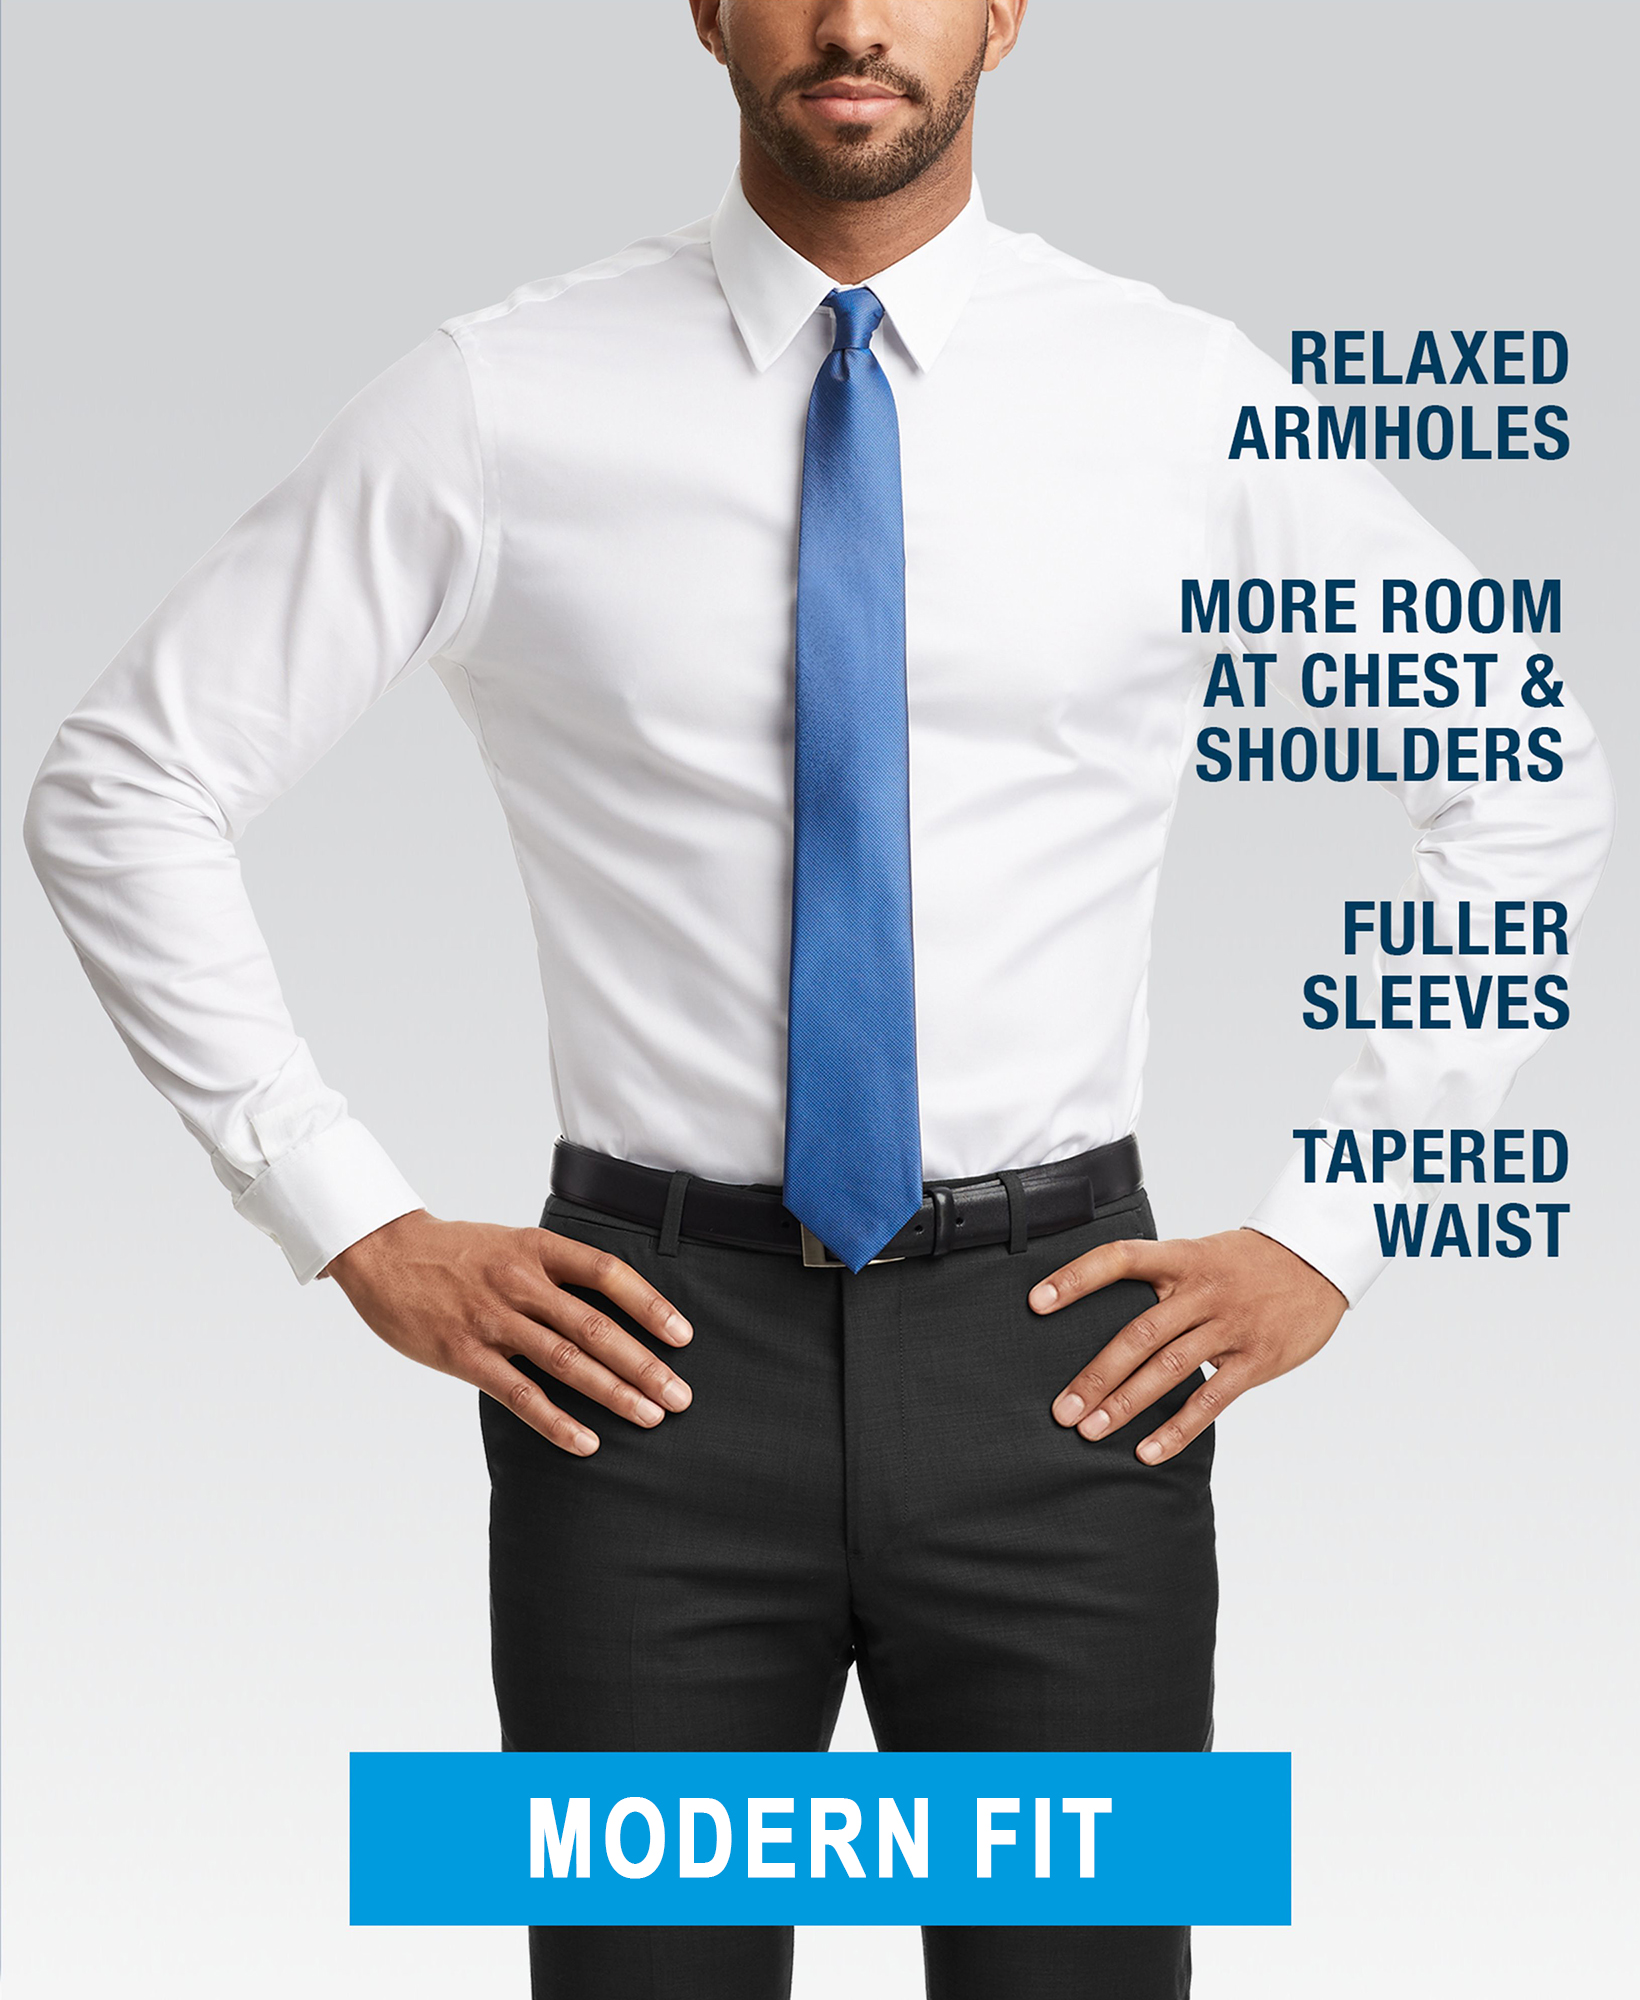 modern fit suit meaning